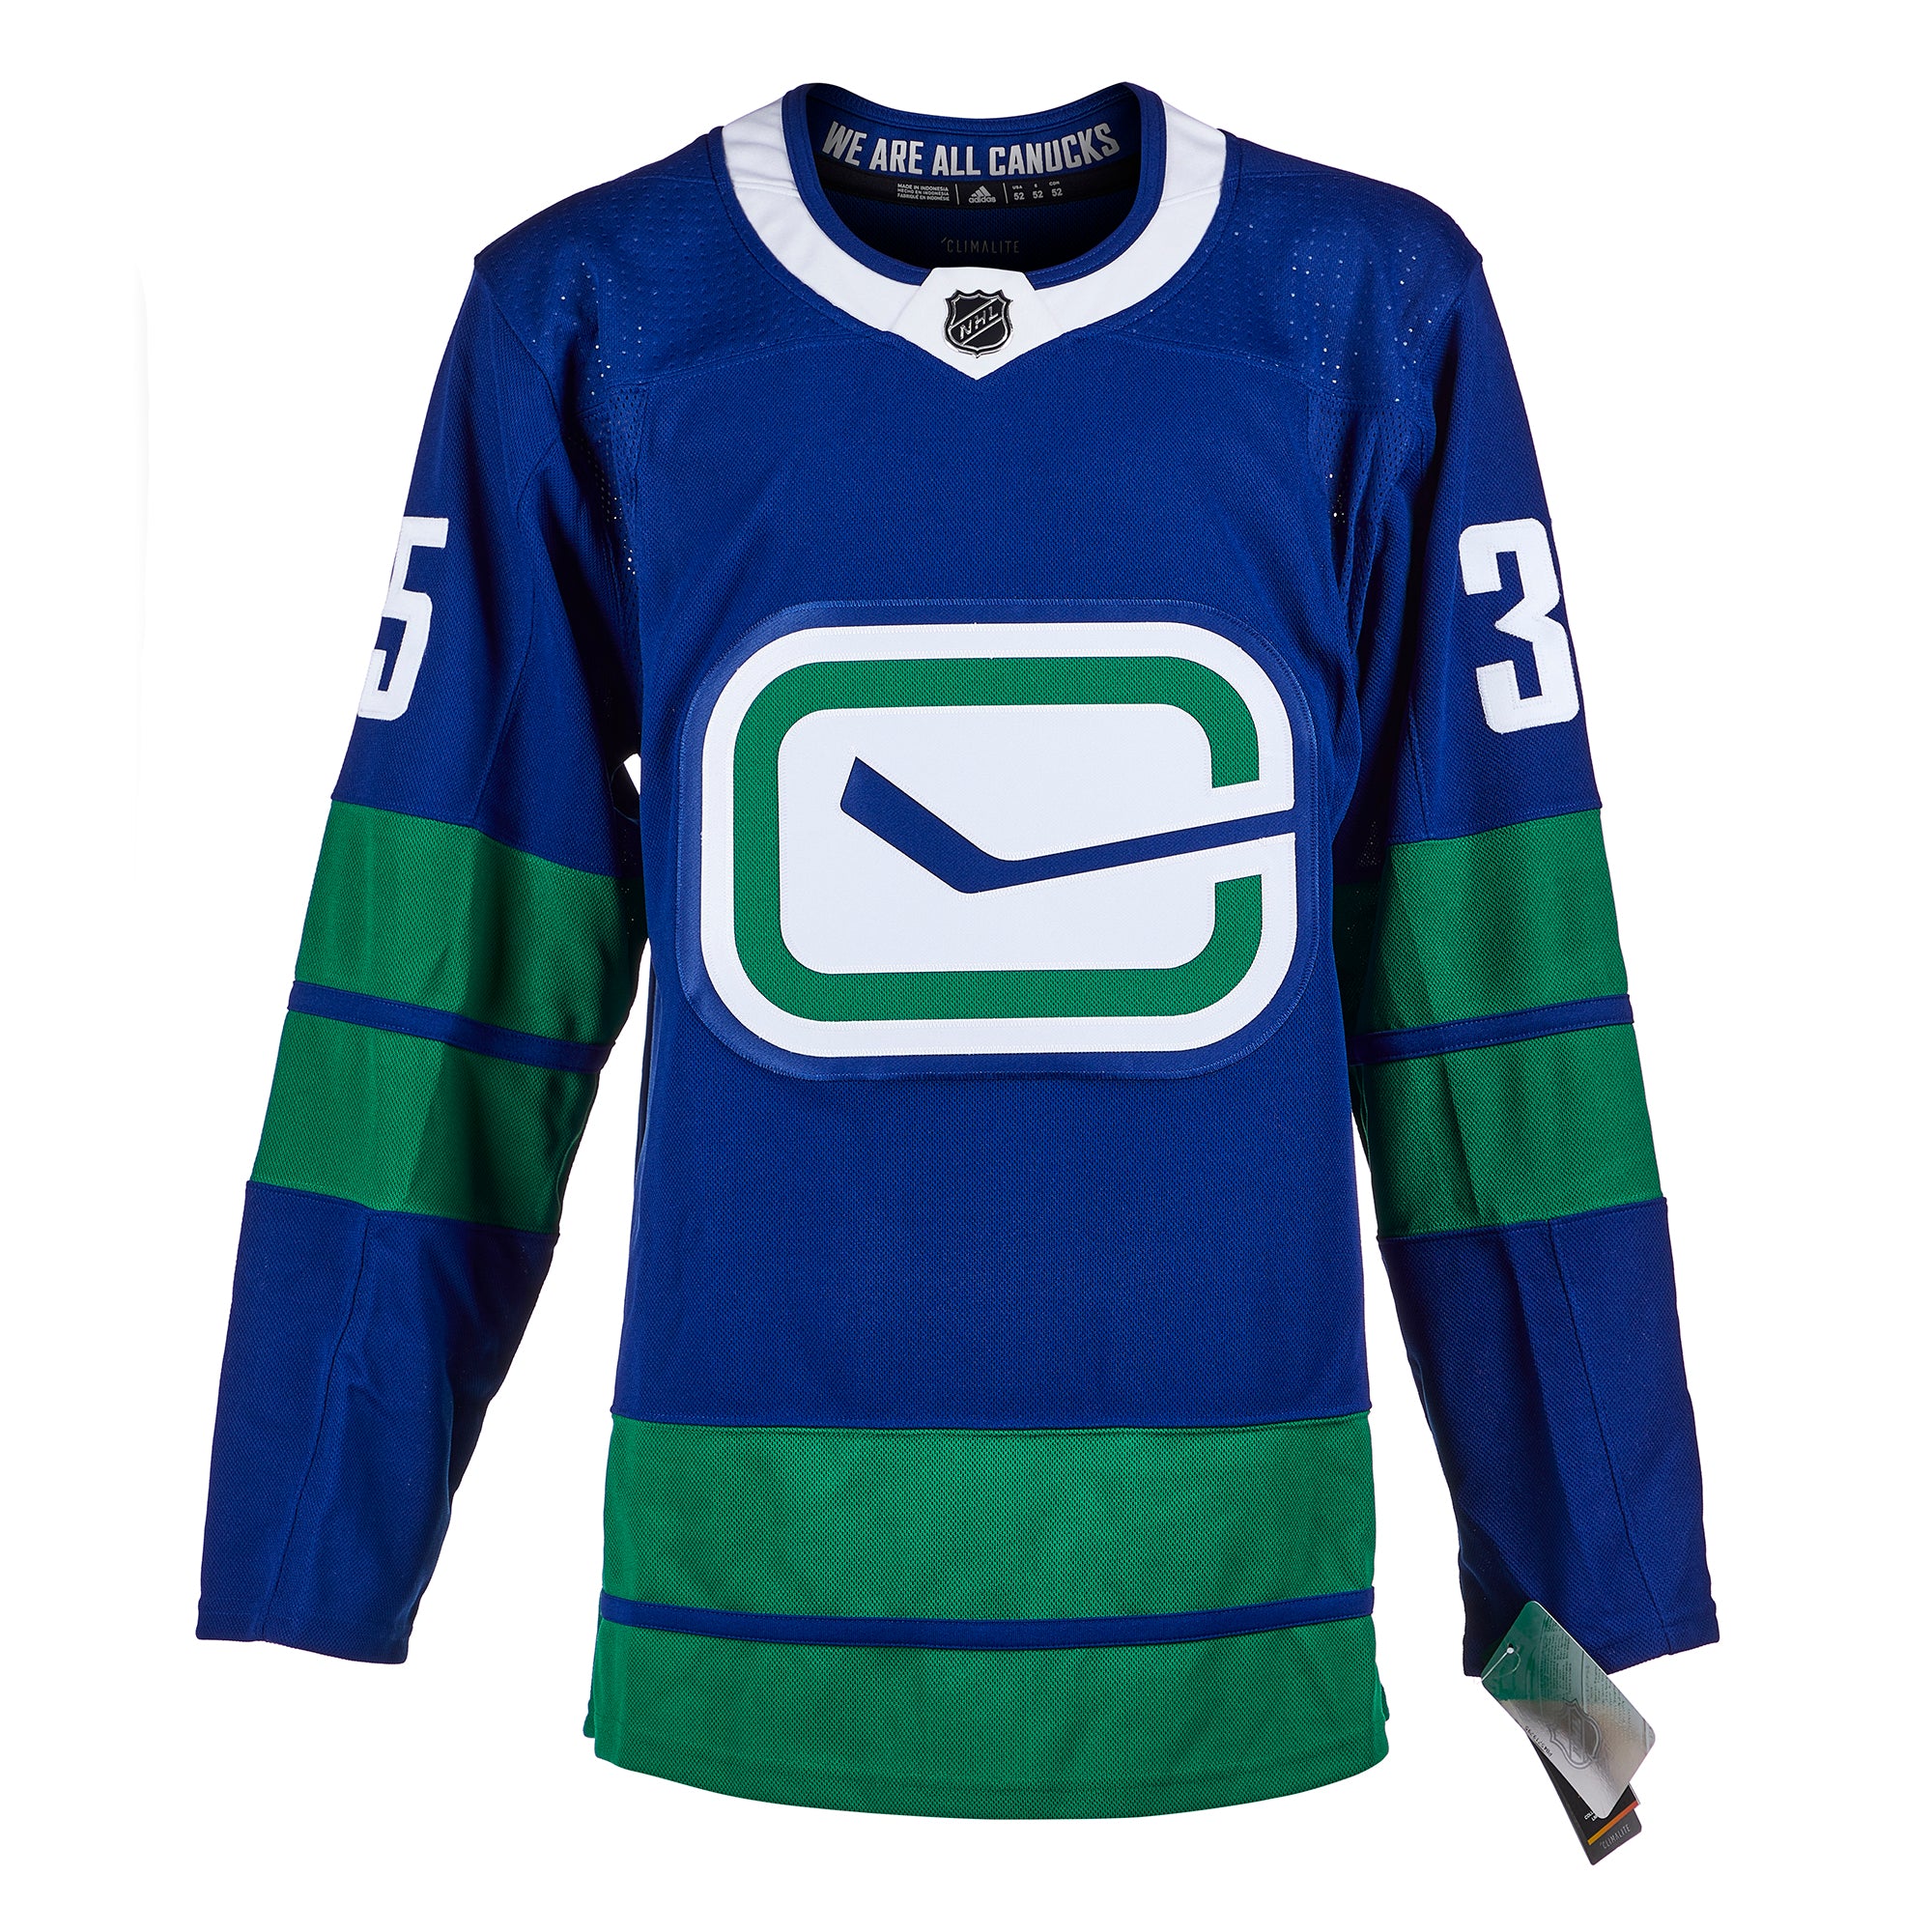 JT Miller Signed Vancouver Canucks Blue Adidas Pro Jersey - NHL Auctions